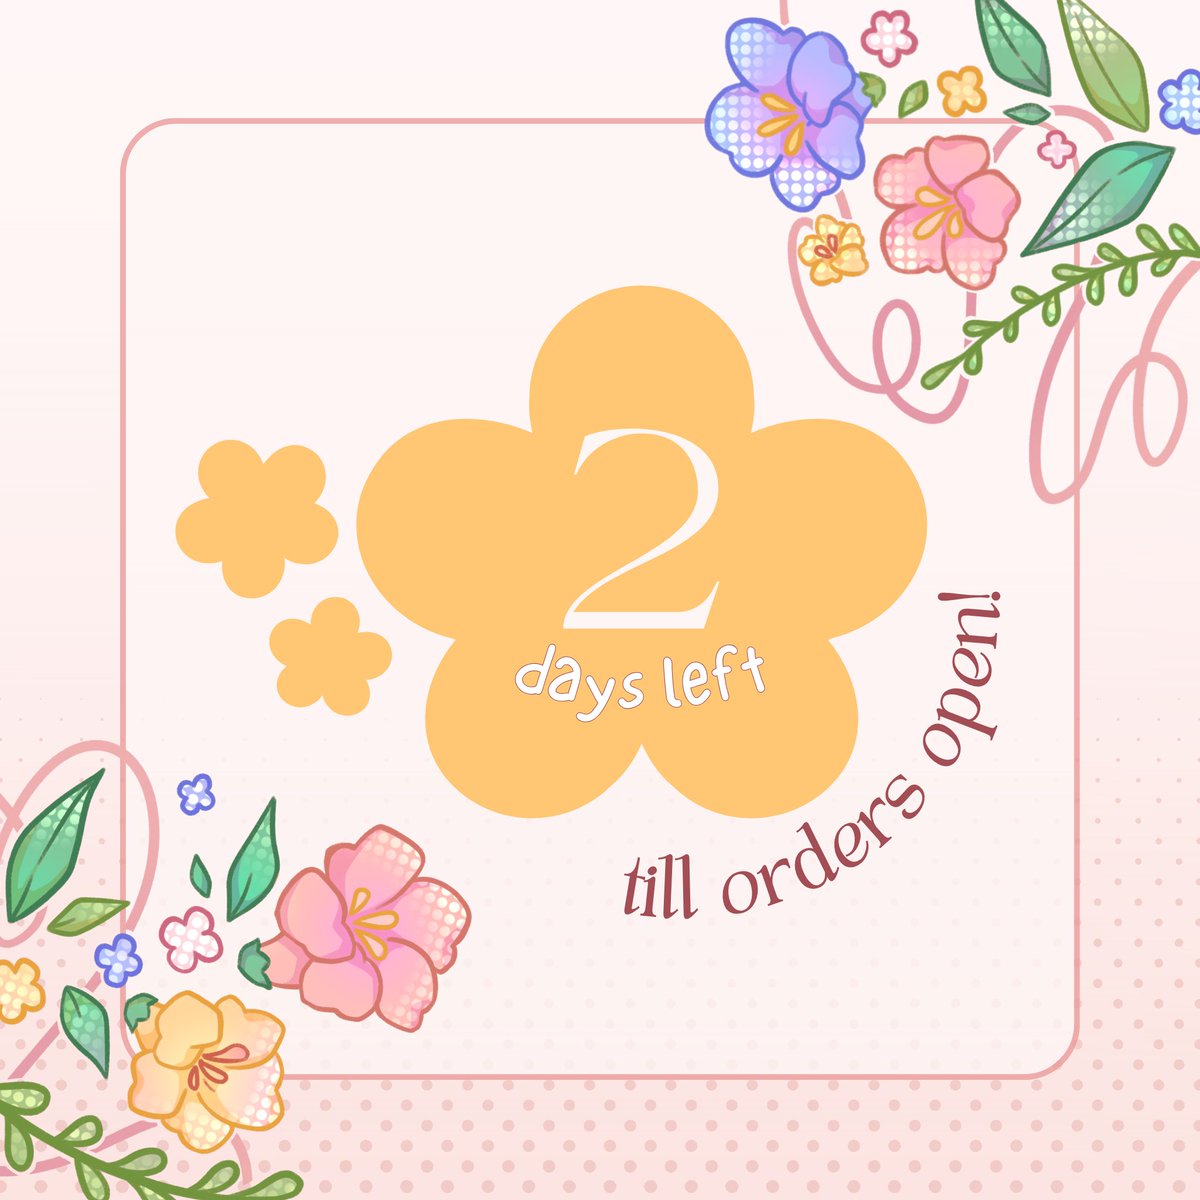 2 DAYS LEFT until the official Zine launch of Florilegium 2024! 💐📆

Grab a copy of the Zine as it releases by April 8 and support our cause! 🌷 

🌸 Check out our carrd for more info:
     ↳ florilegiumzine.carrd.co